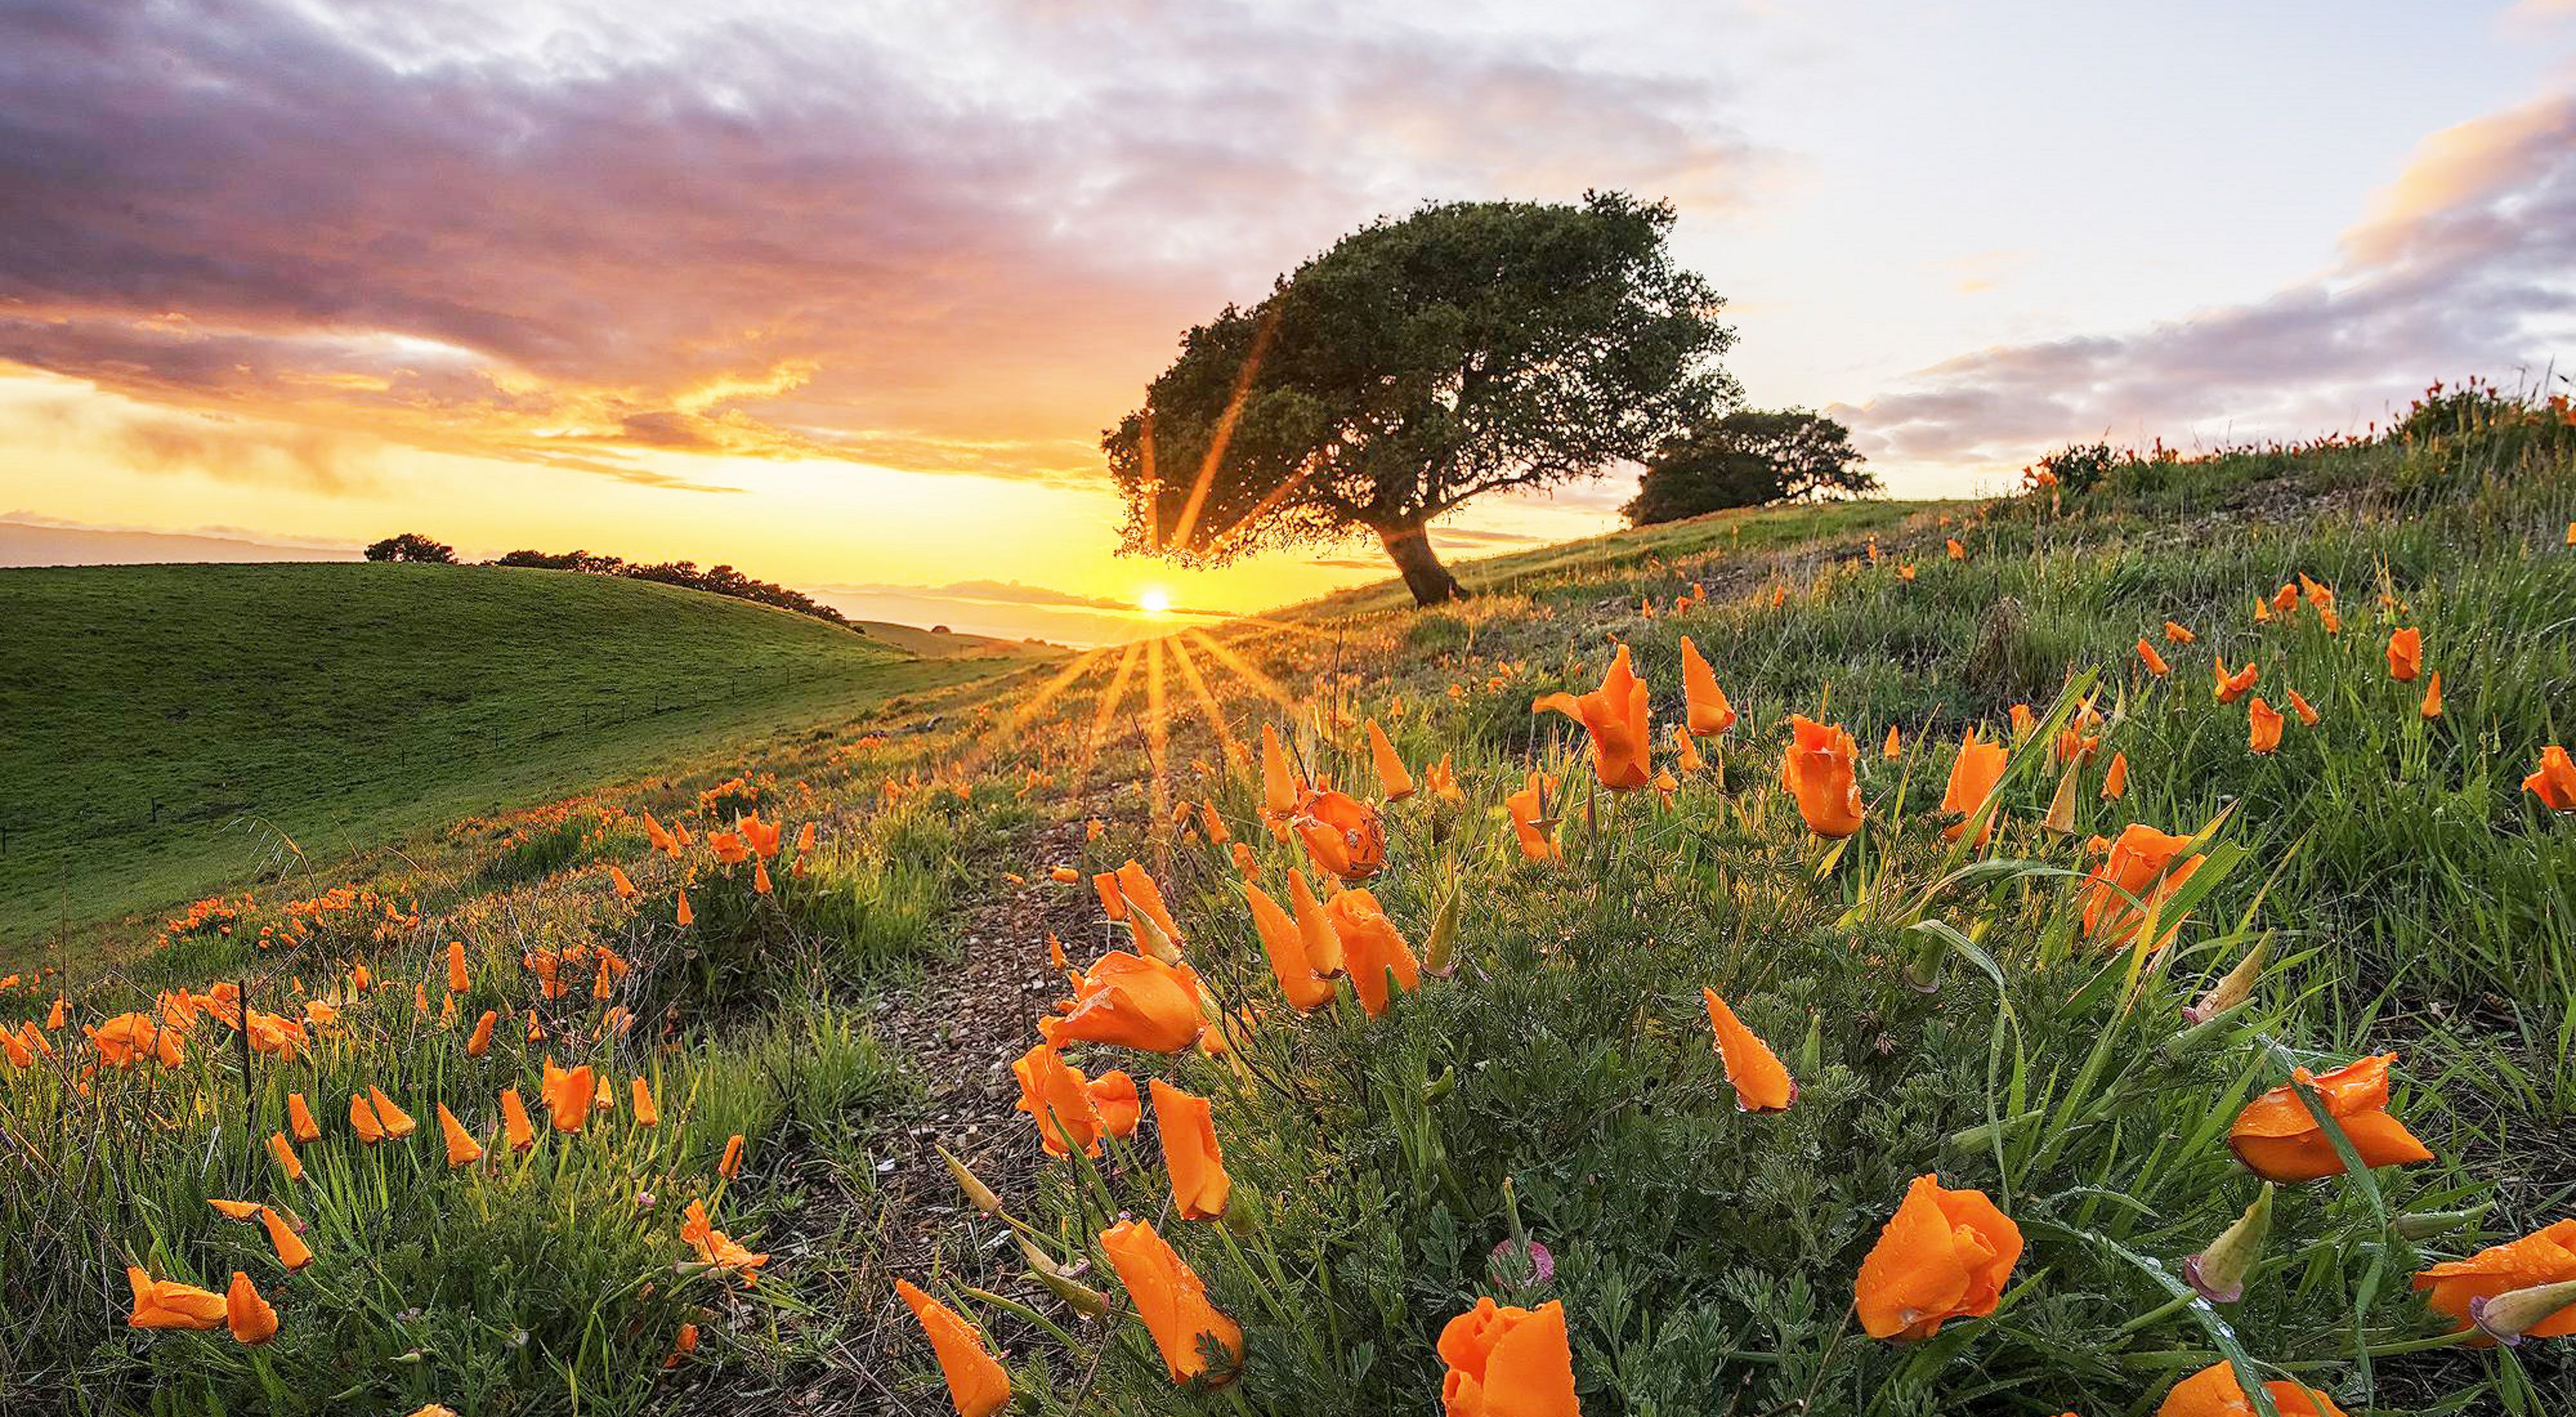 The sun shines just above grassy hills over a field of California poppies.